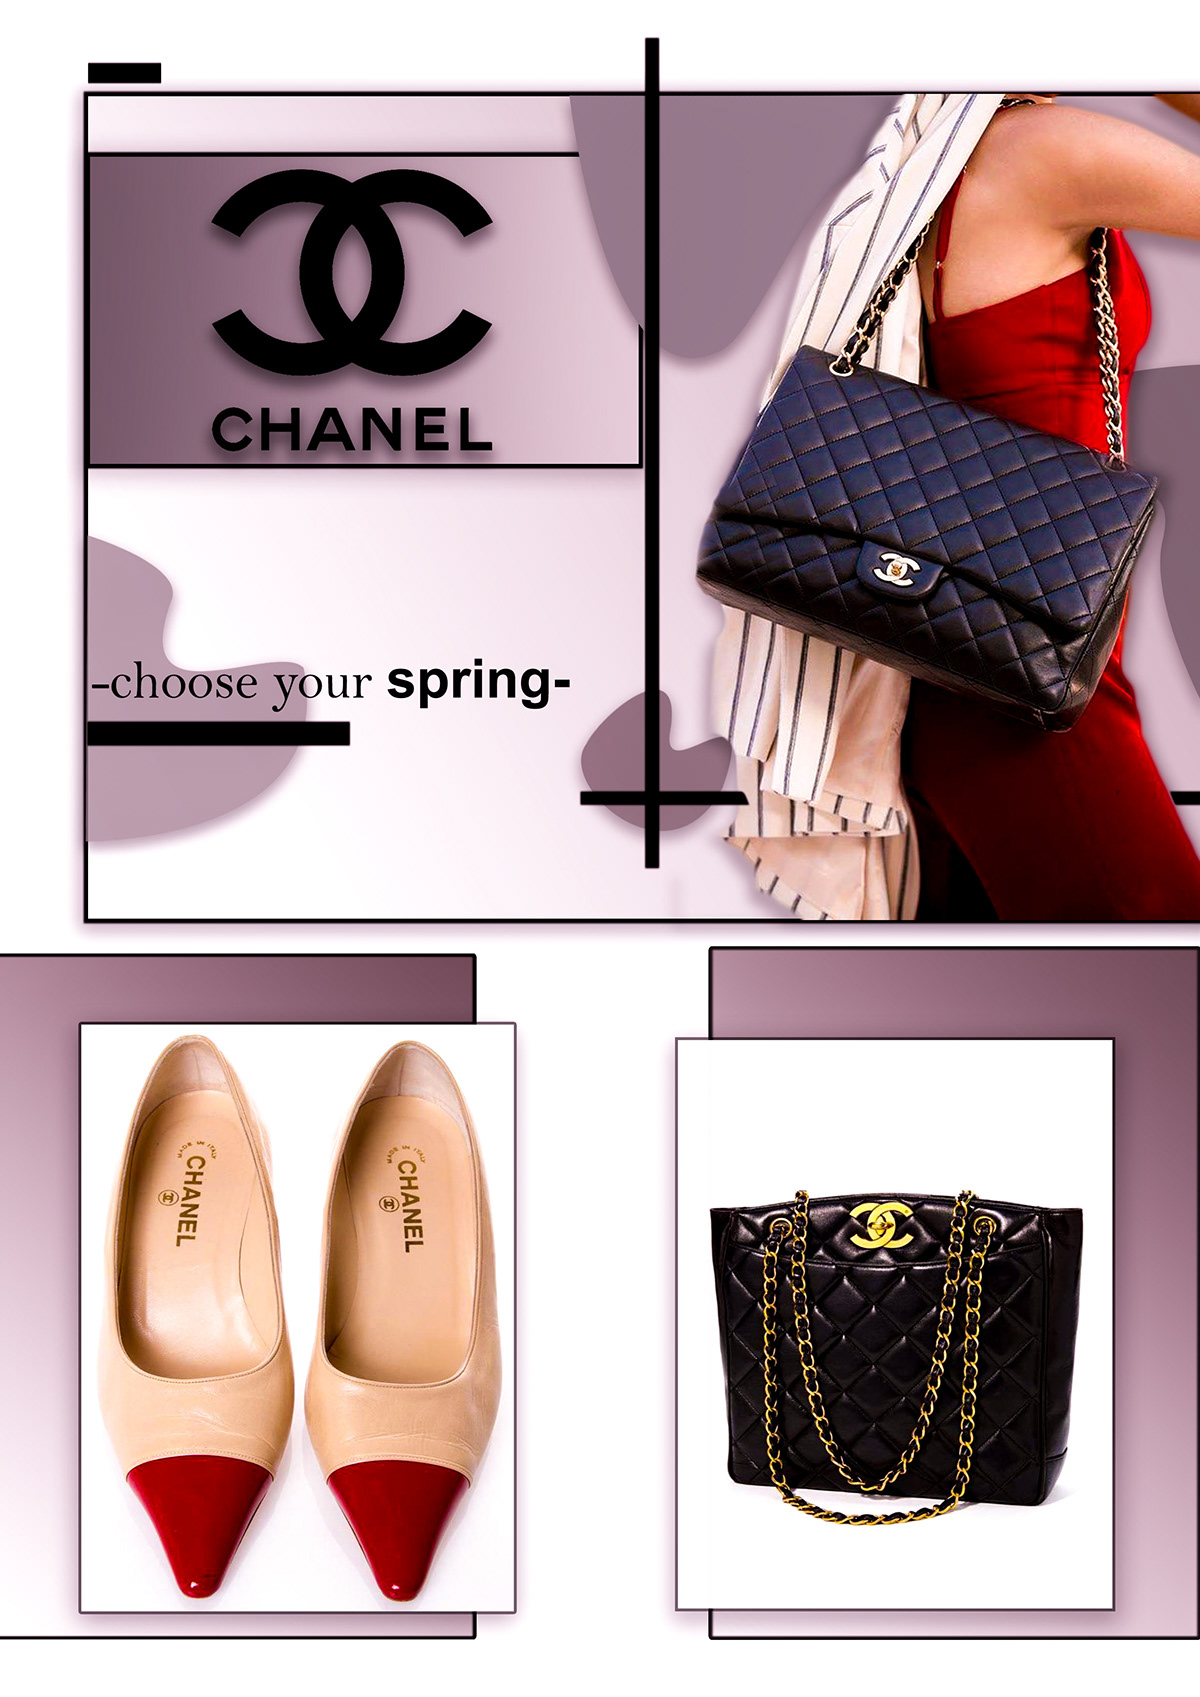 chanel photoshop Advertising  design bags shoes ladies